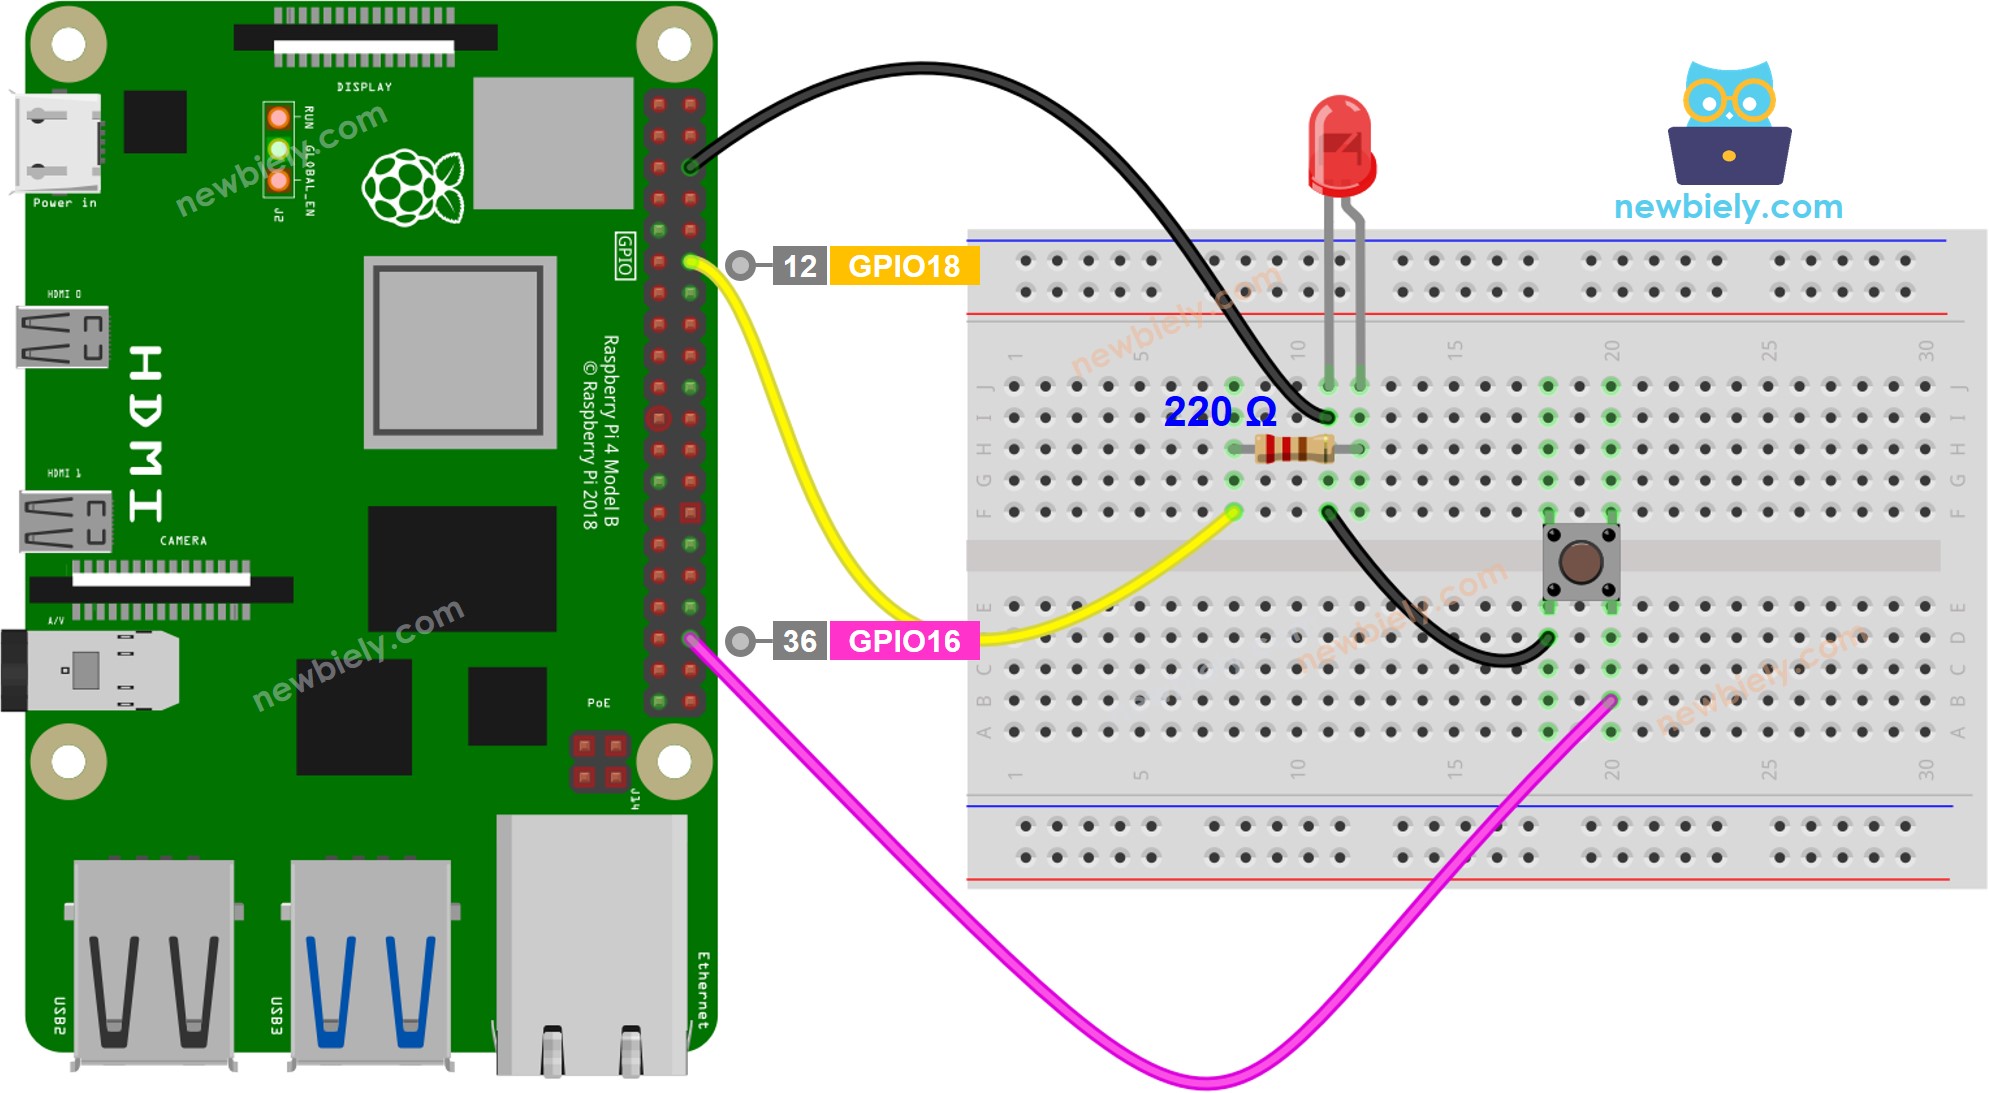 The wiring diagram between Raspberry Pi and Button LED